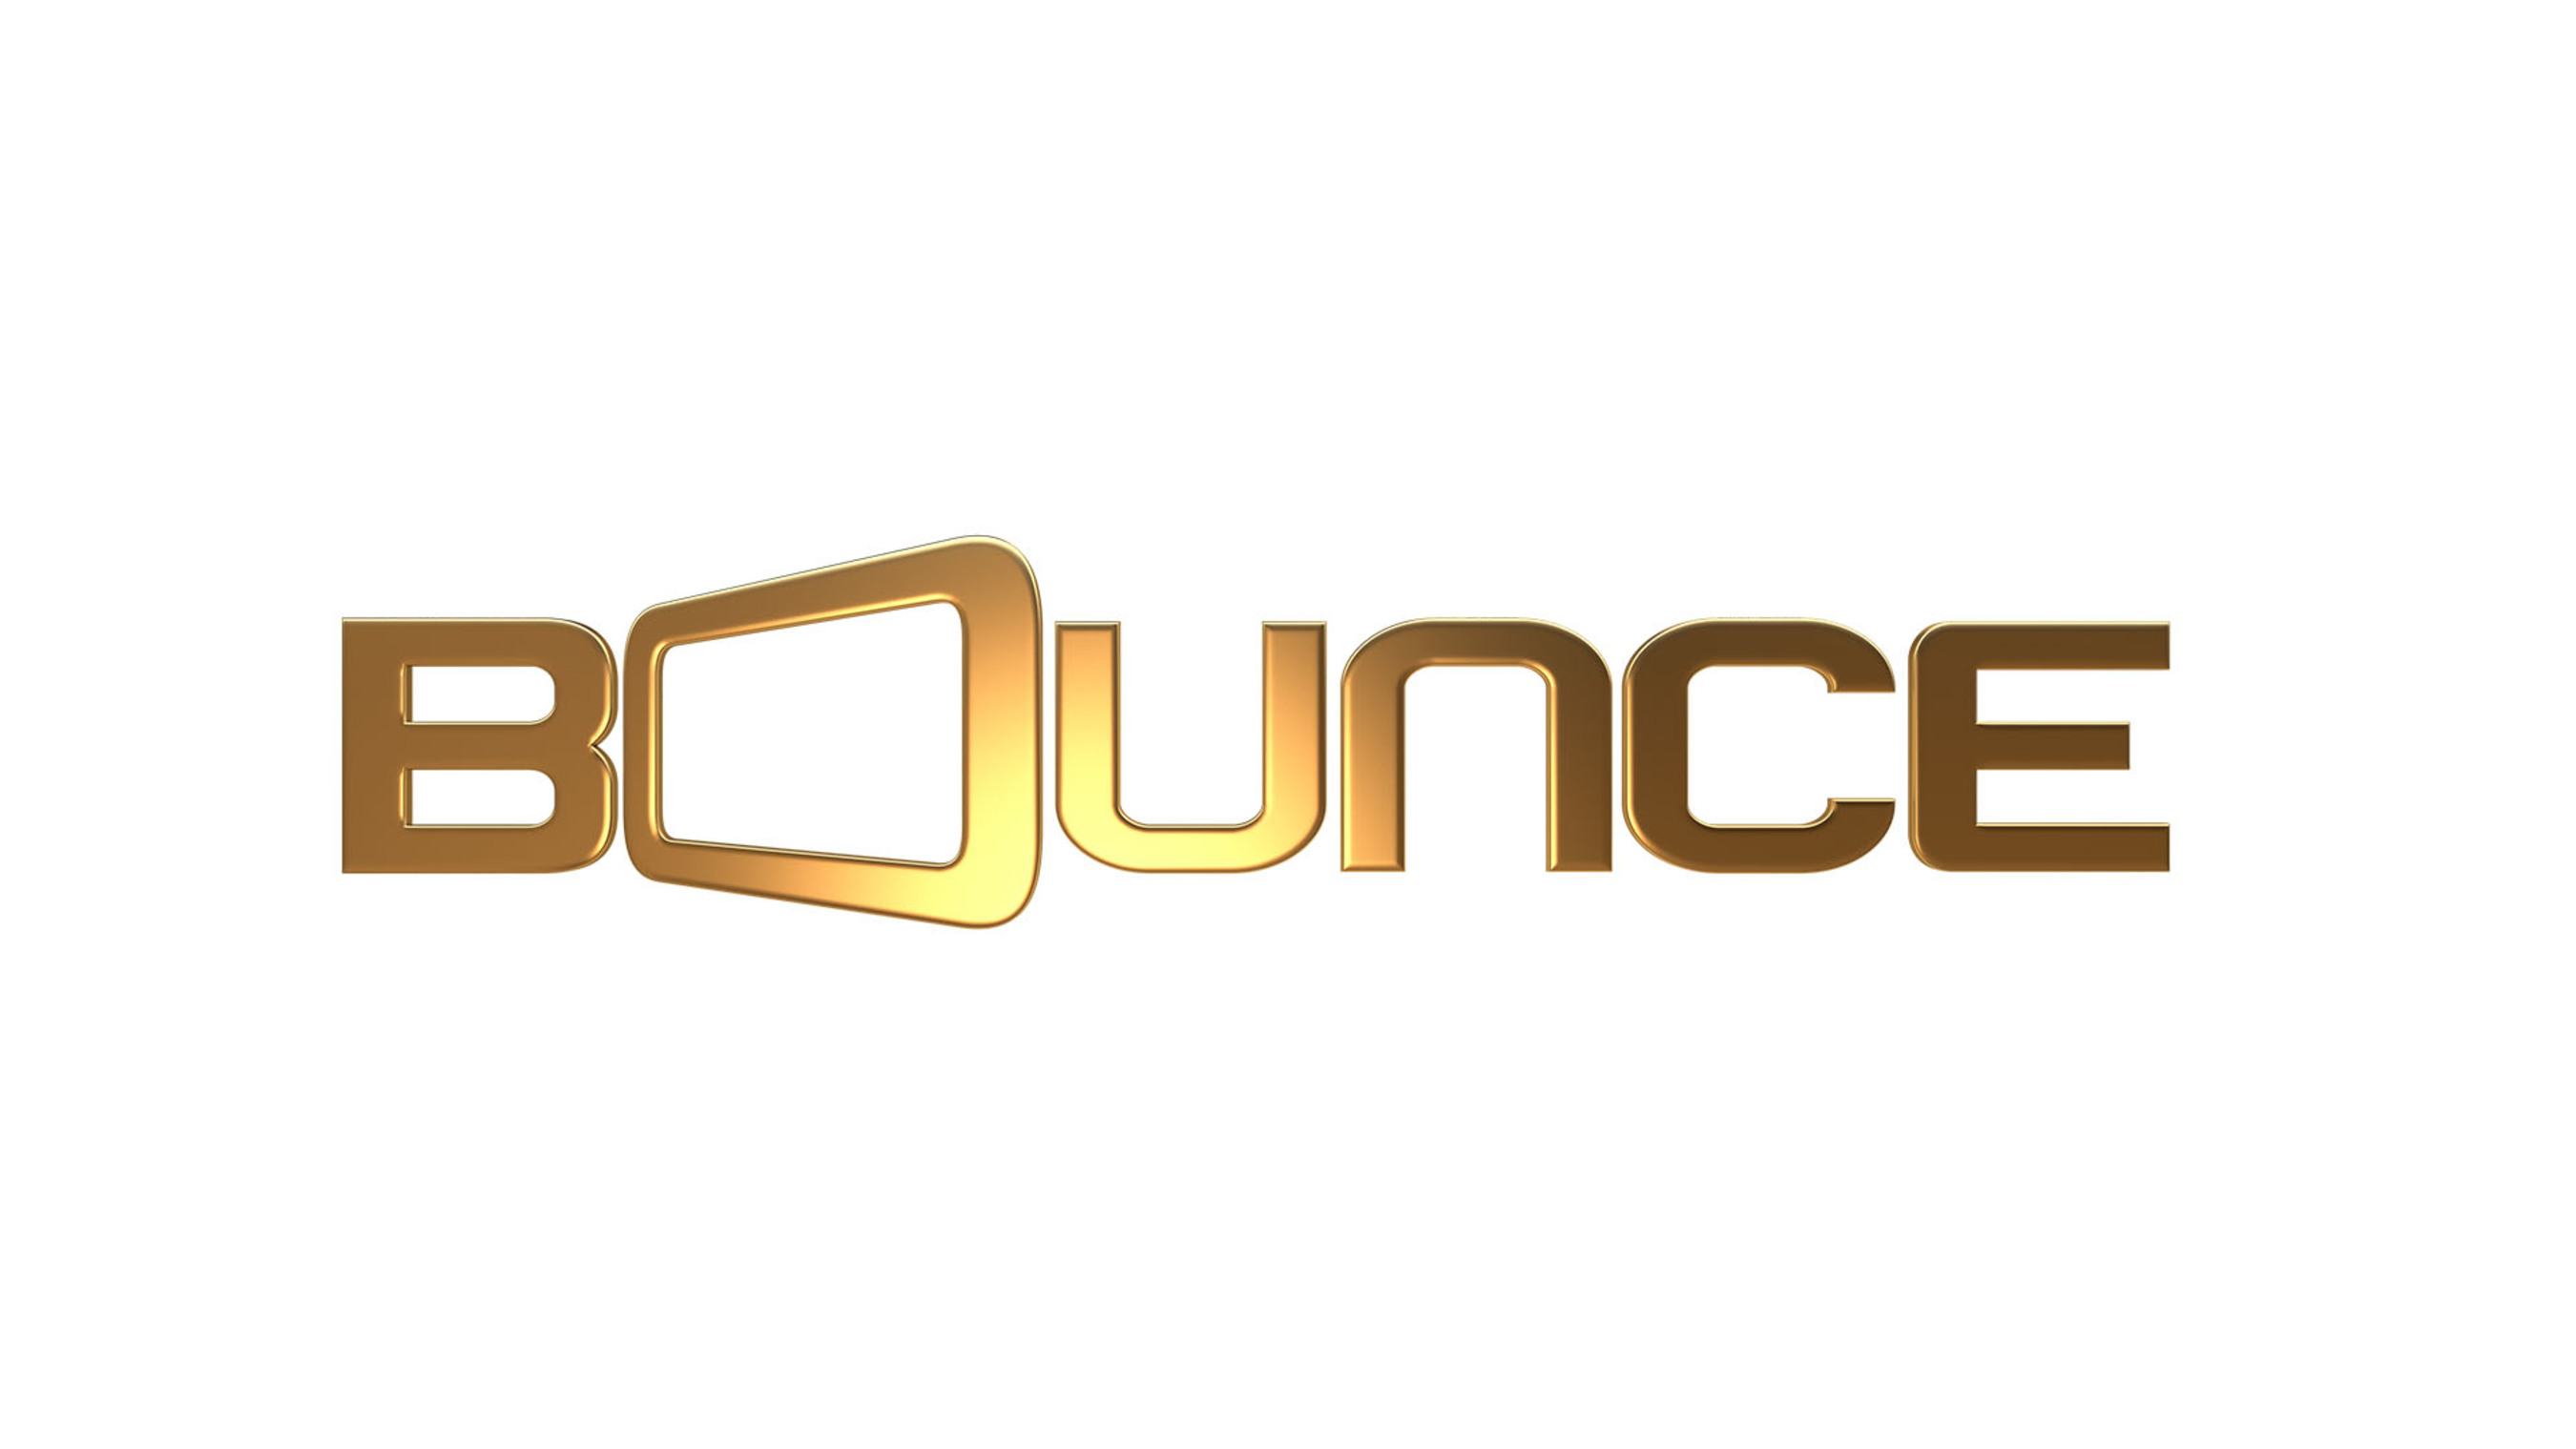 Bounce TV is the first African American broadcast network. (PRNewsFoto/Bounce TV) (PRNewsFoto/)